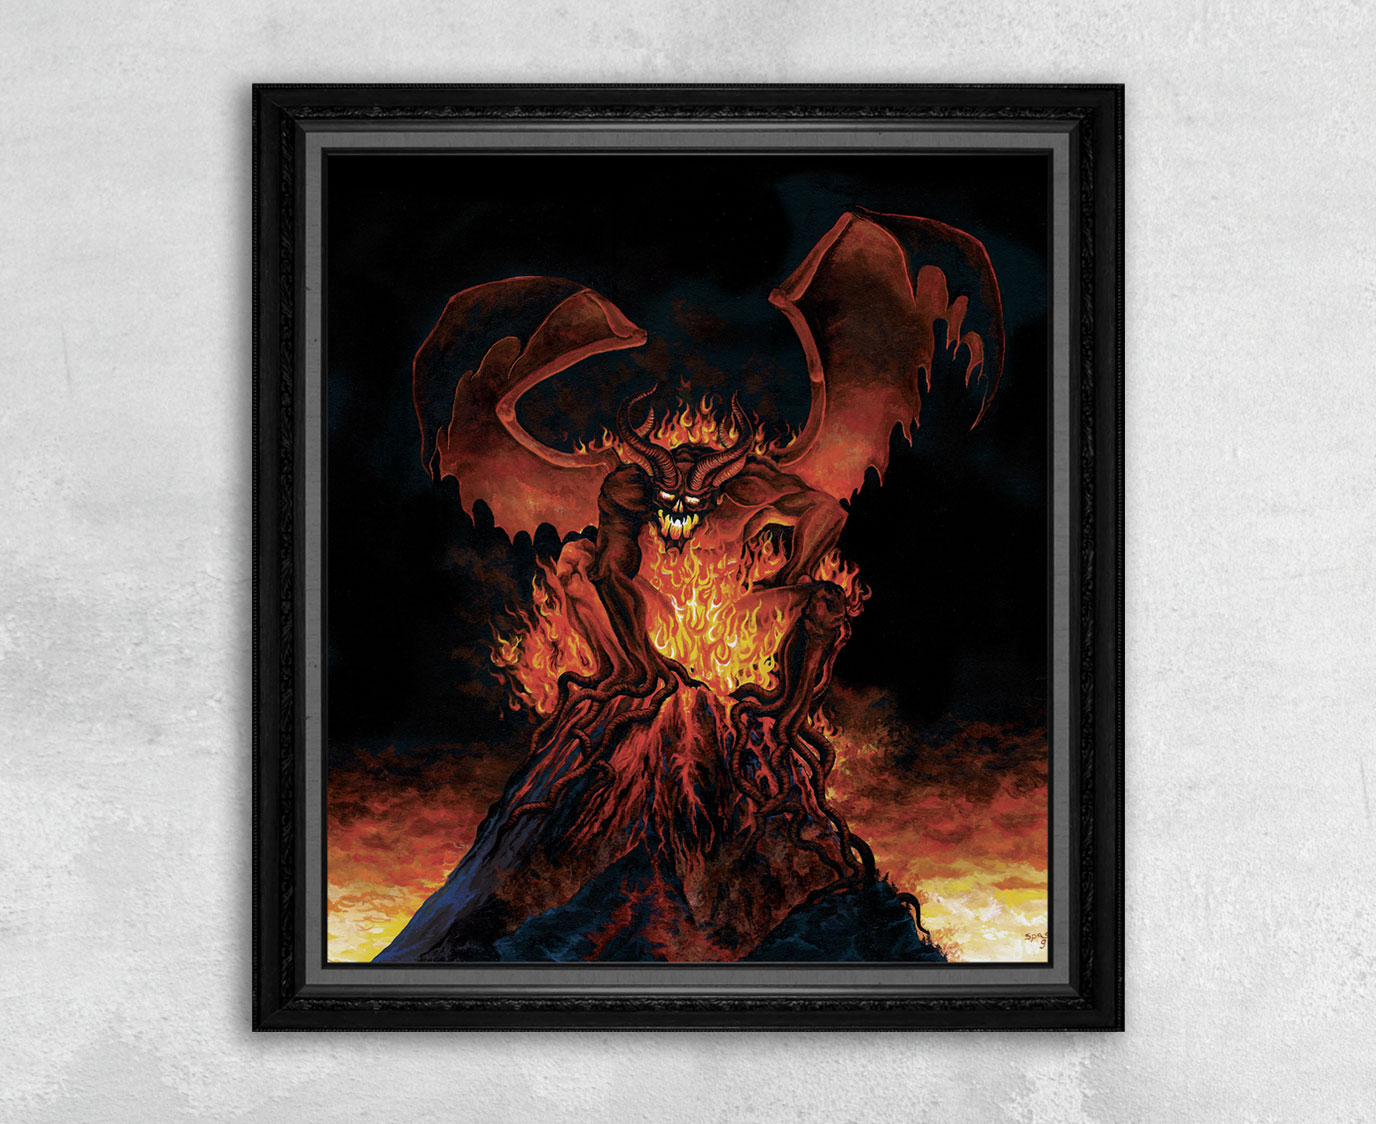 Wrath of Typhon - Print of a Burning Demon on a Volcano